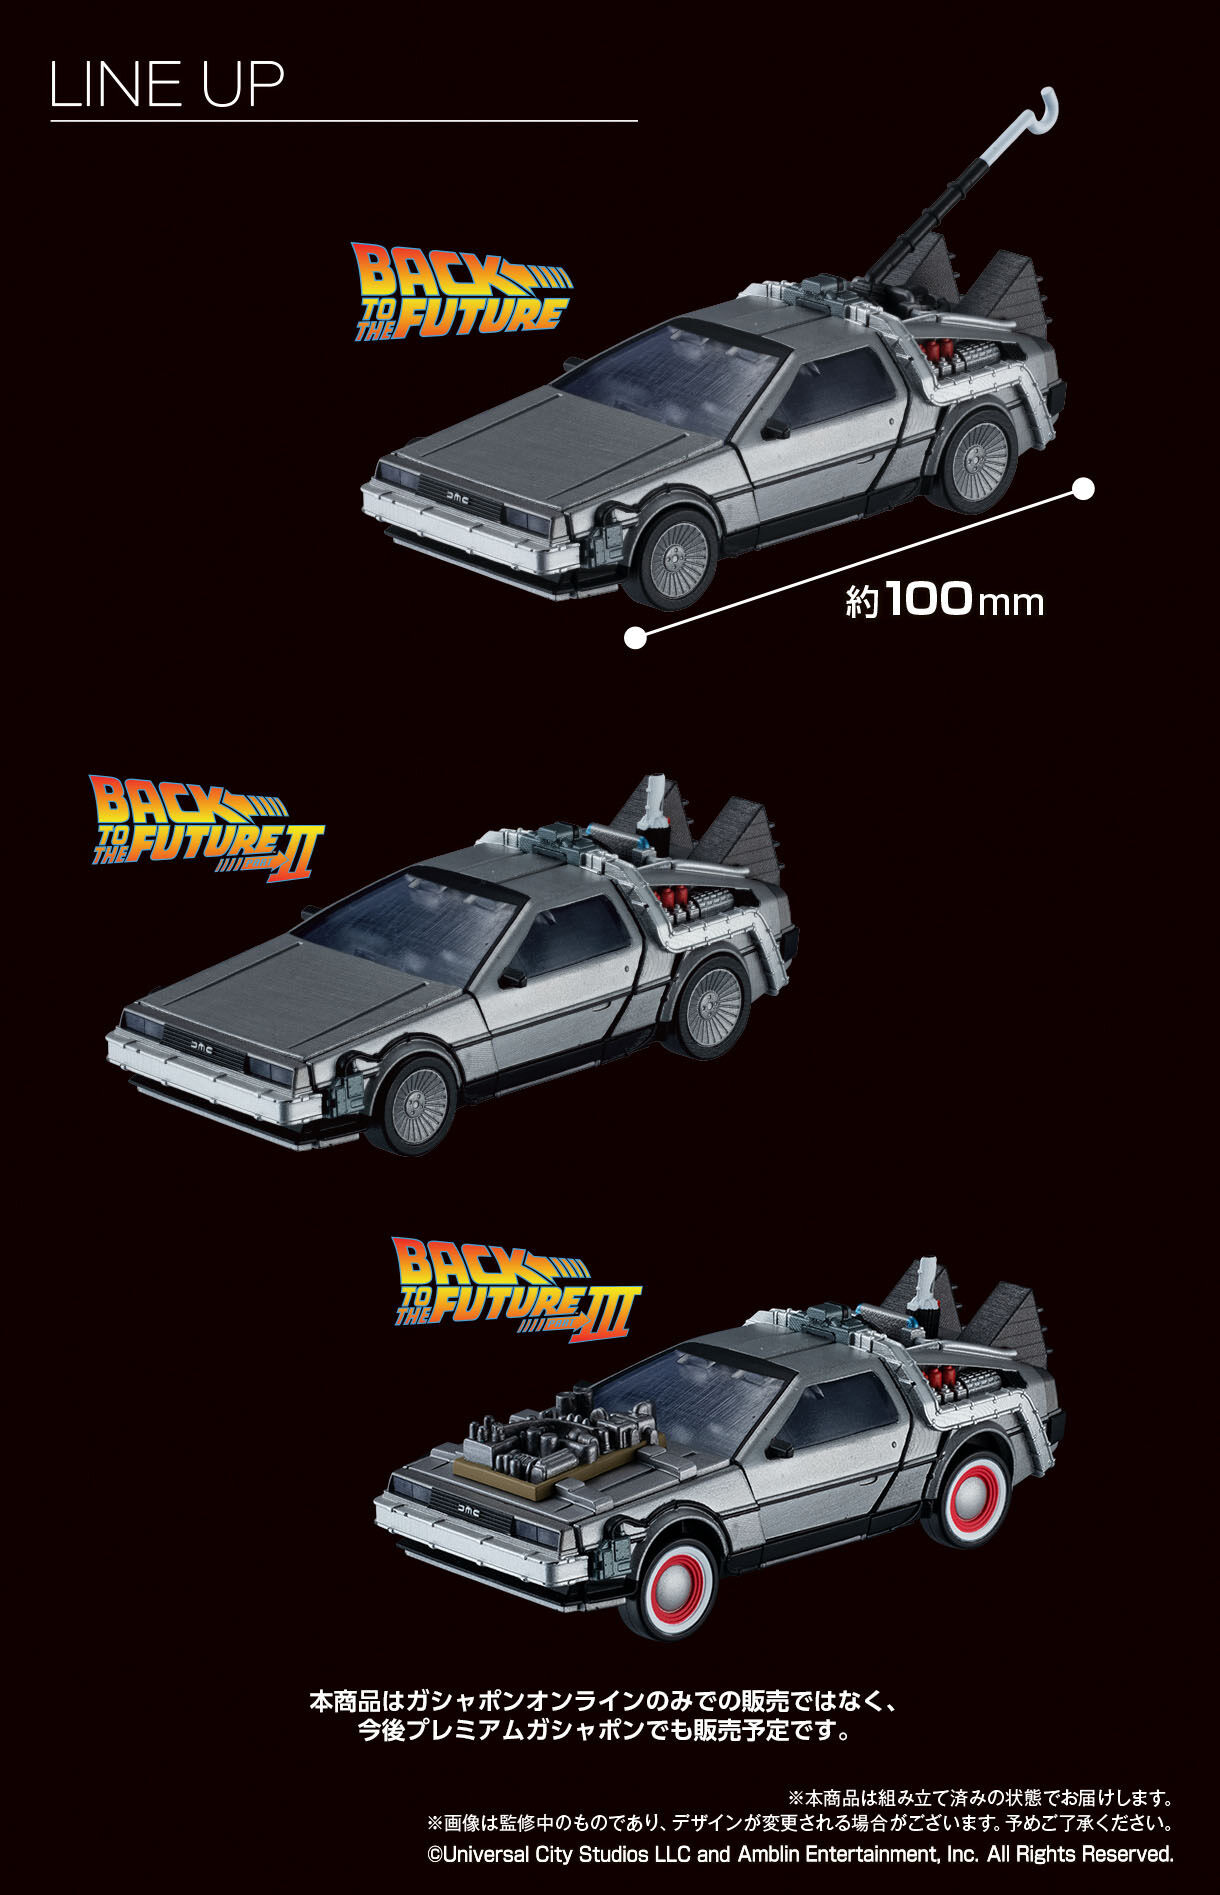 BACK TO THE FUTURE EXCEED MODEL -デロリアン- DX | フィギュア ...